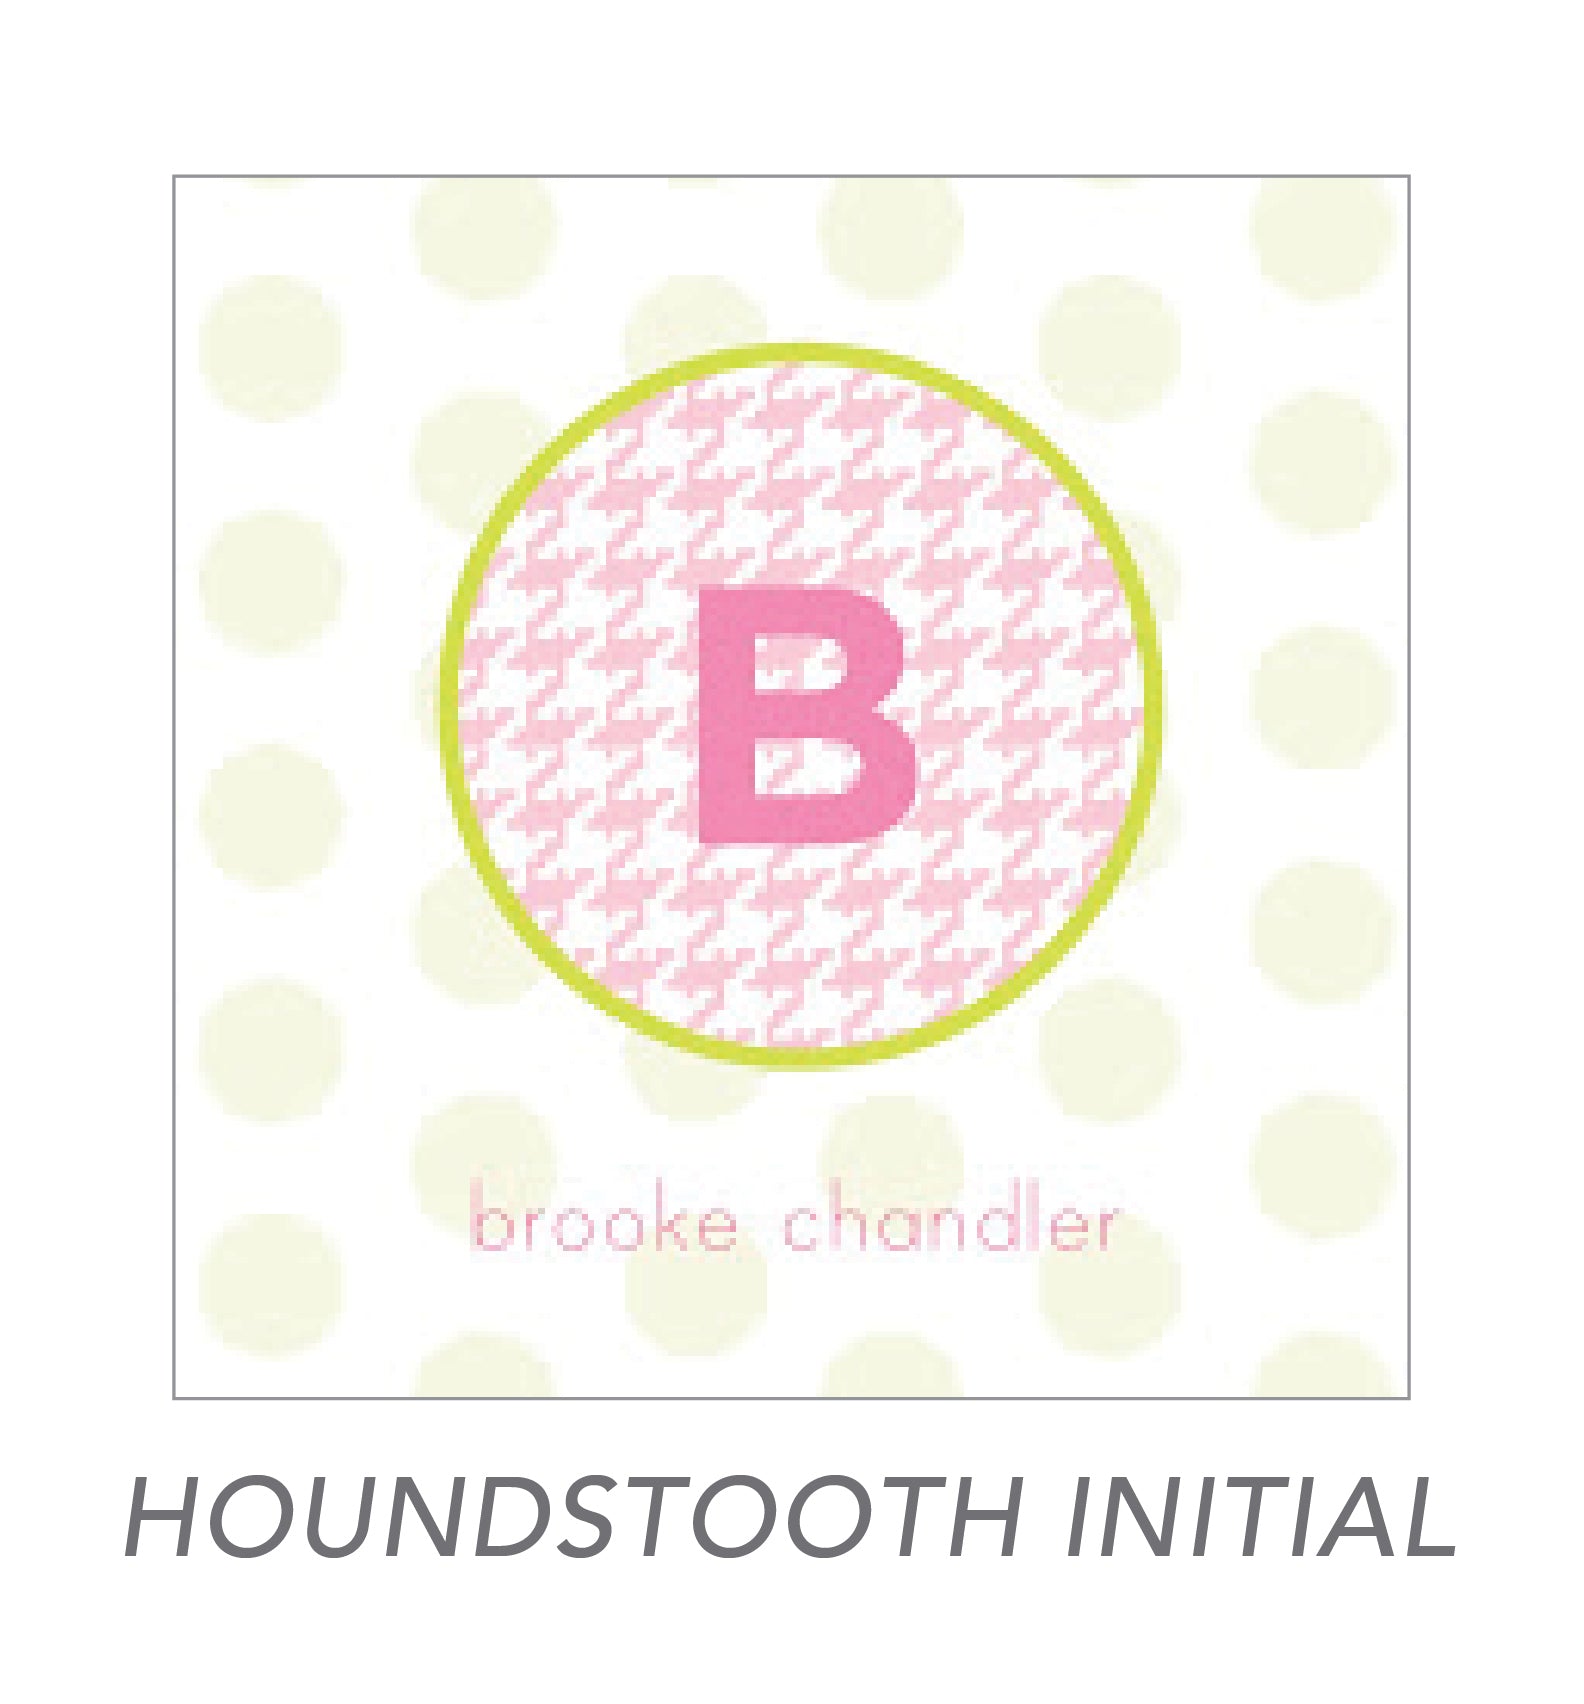 girl stickers (houndstooth initial)